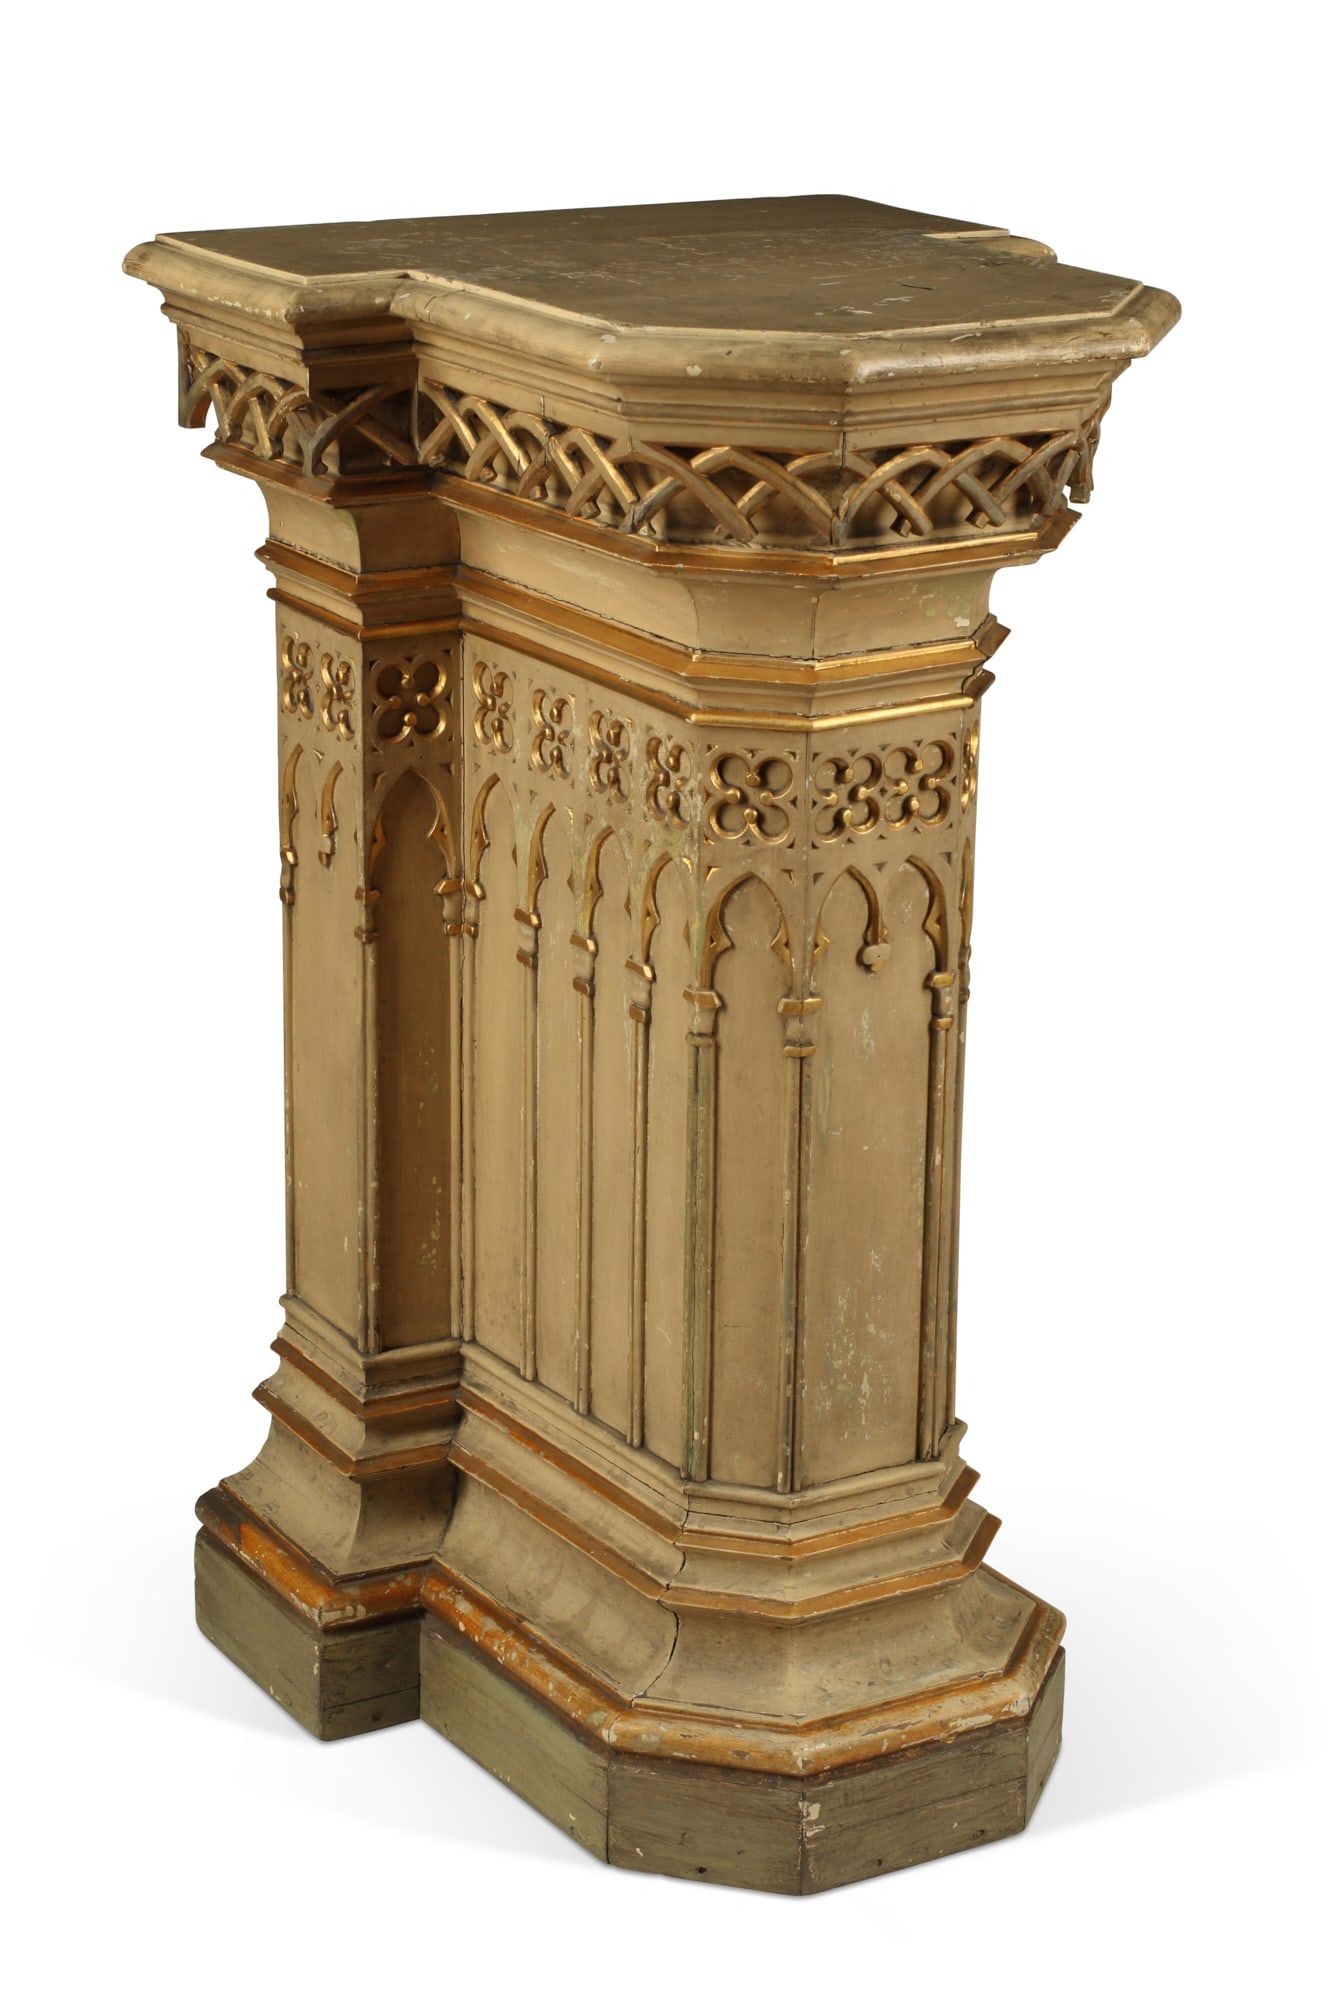 A GOTHIC REVIVAL CREAM PAINTED